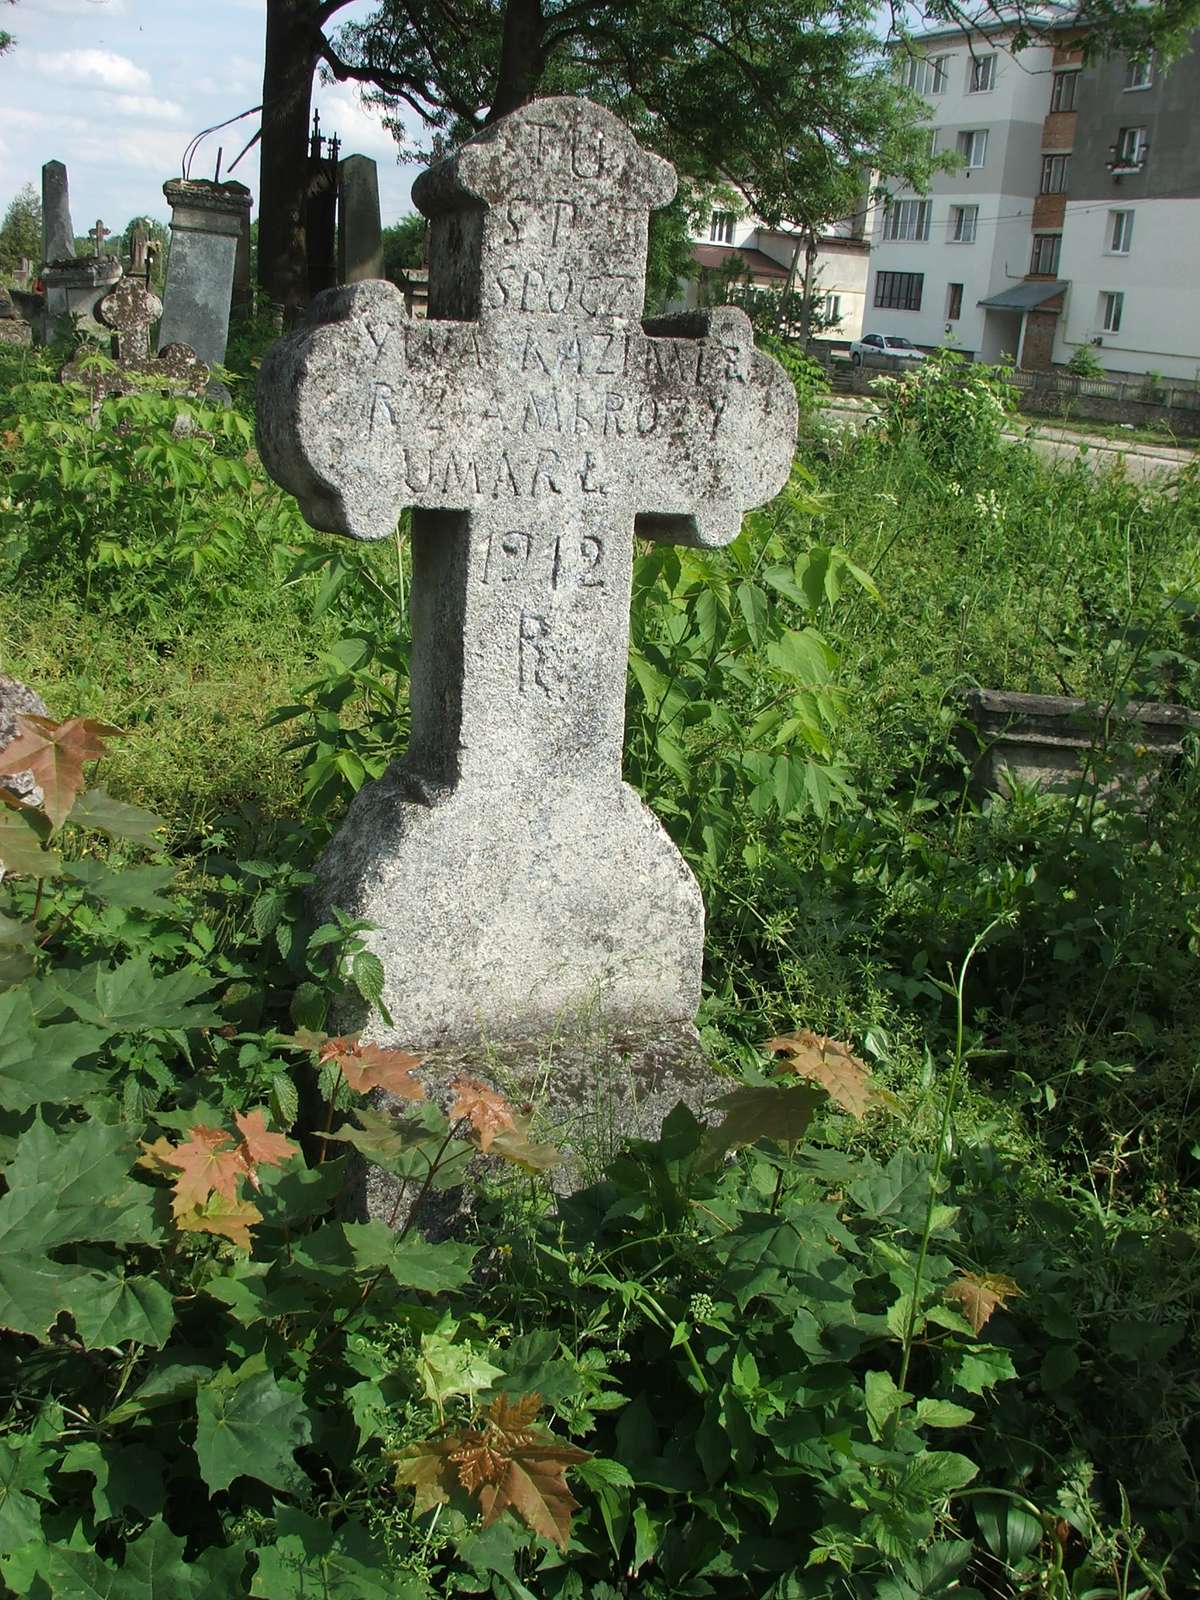 Tombstone of Casimir Ambrose, Zbarazh cemetery, sector 01b